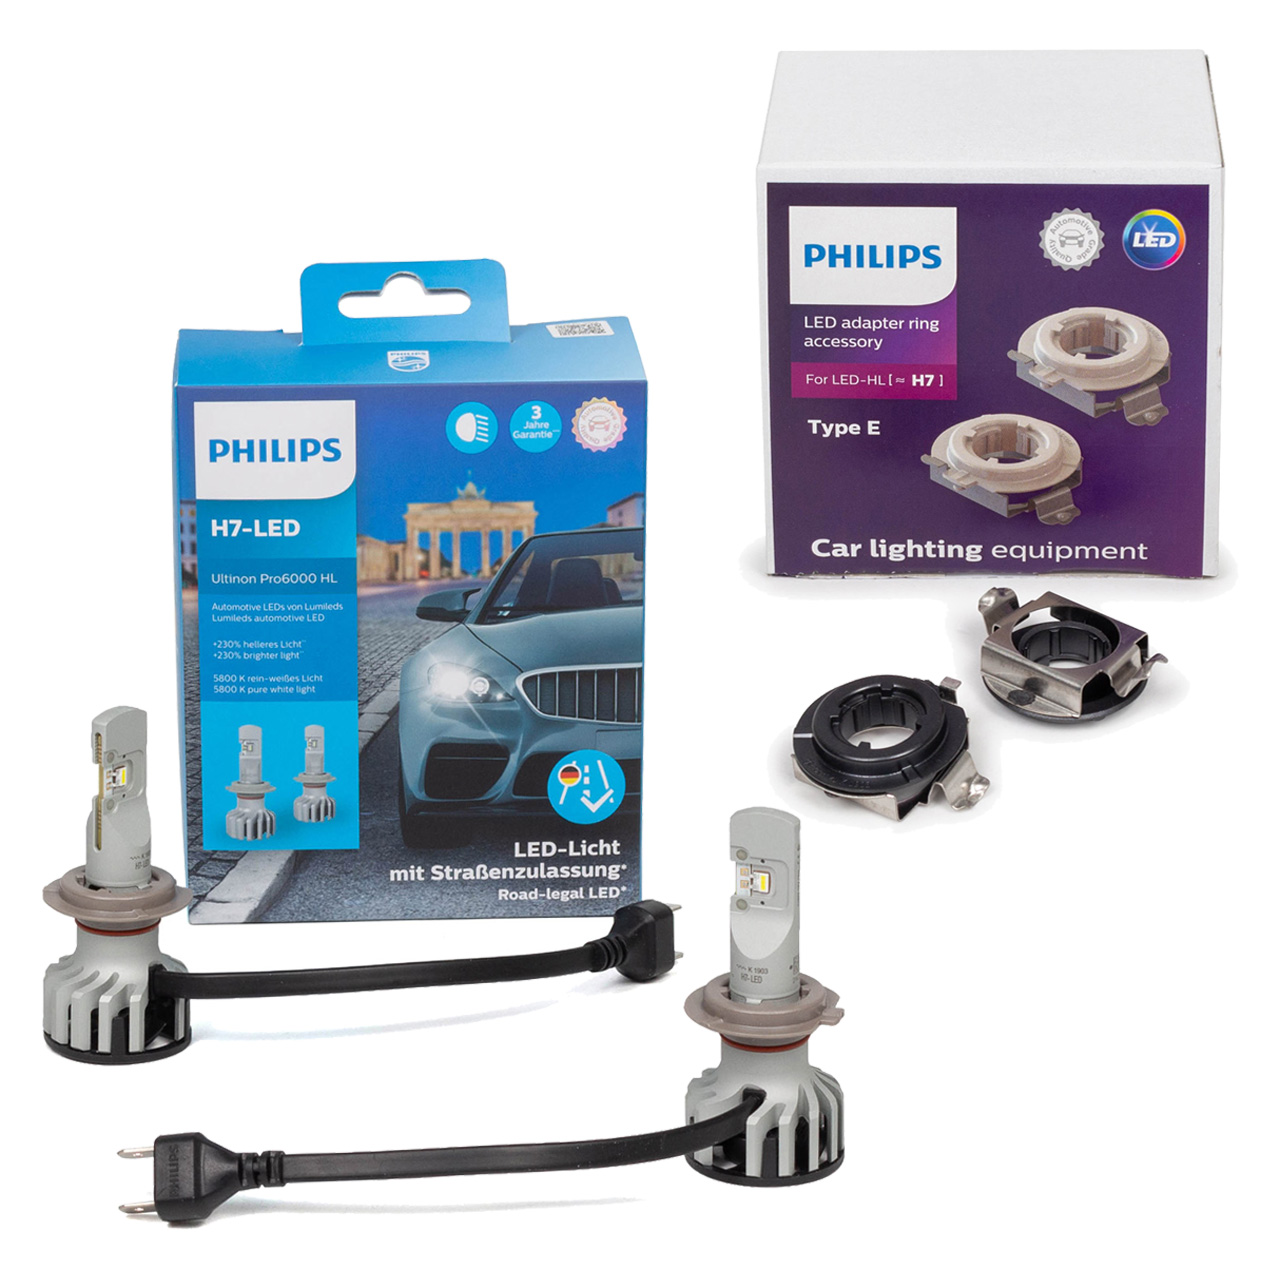 2x PHILIPS Ultinon Pro6000 H7 LED + Adapter MERCEDES W246 W205 C